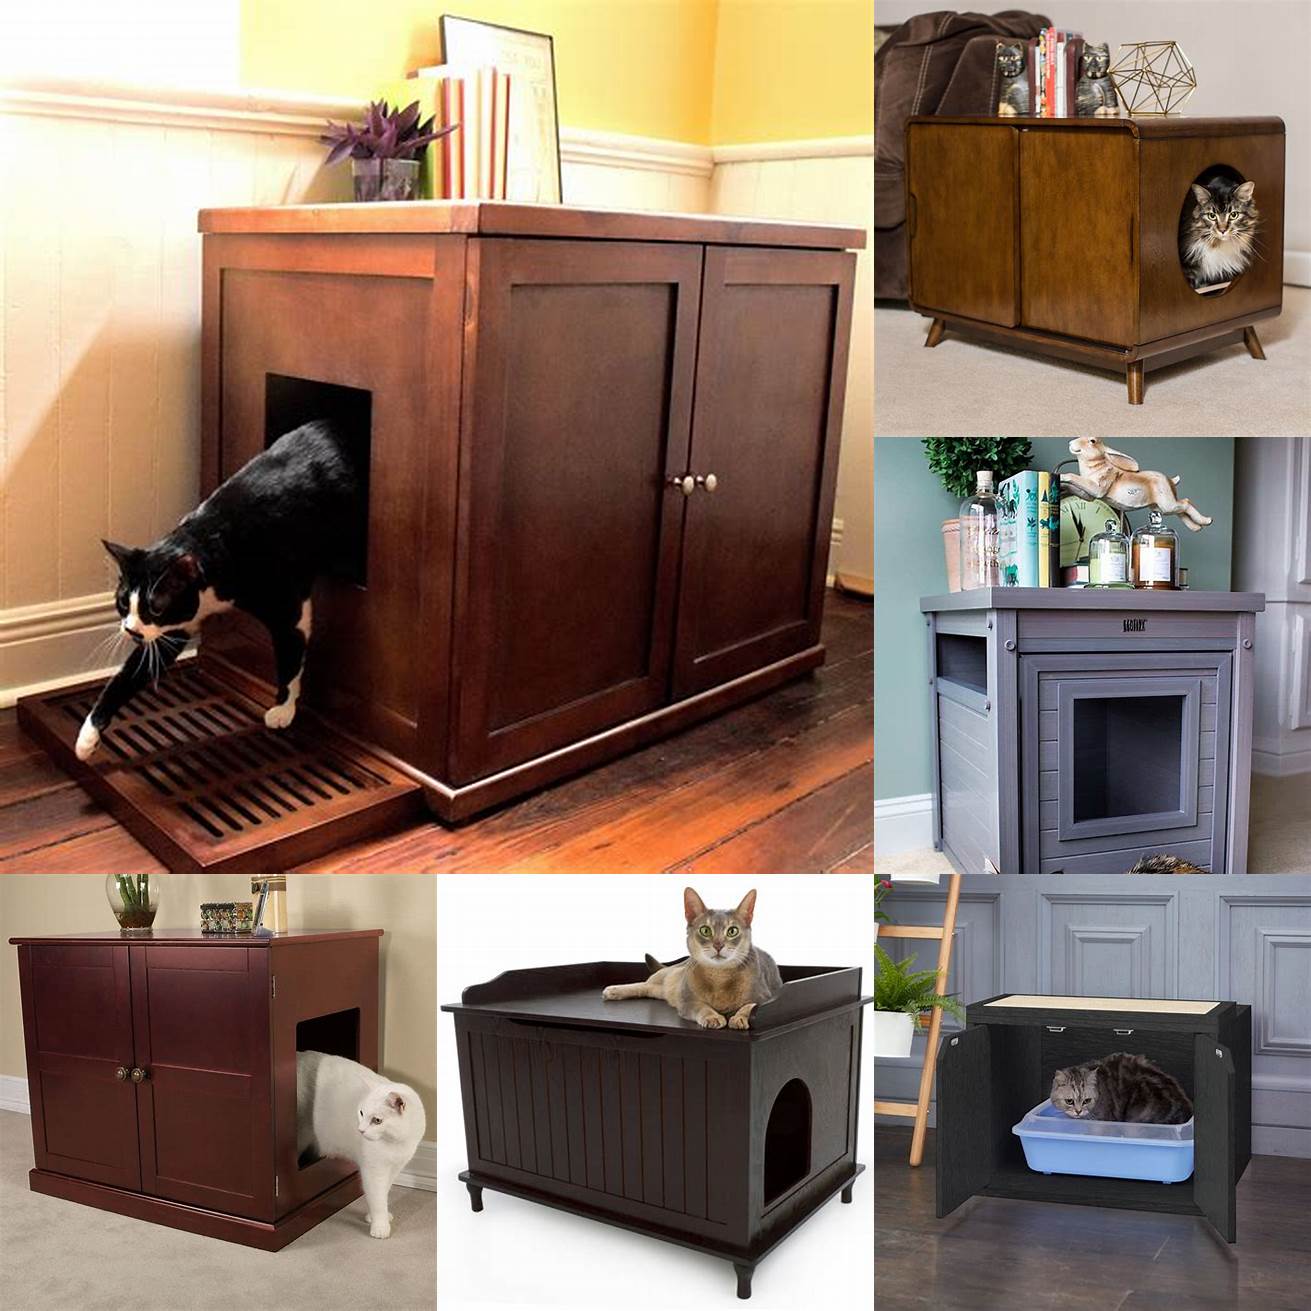 Enhances decor Cat litter box enclosures come in a variety of styles and designs which means you can choose one that complements your homes decor